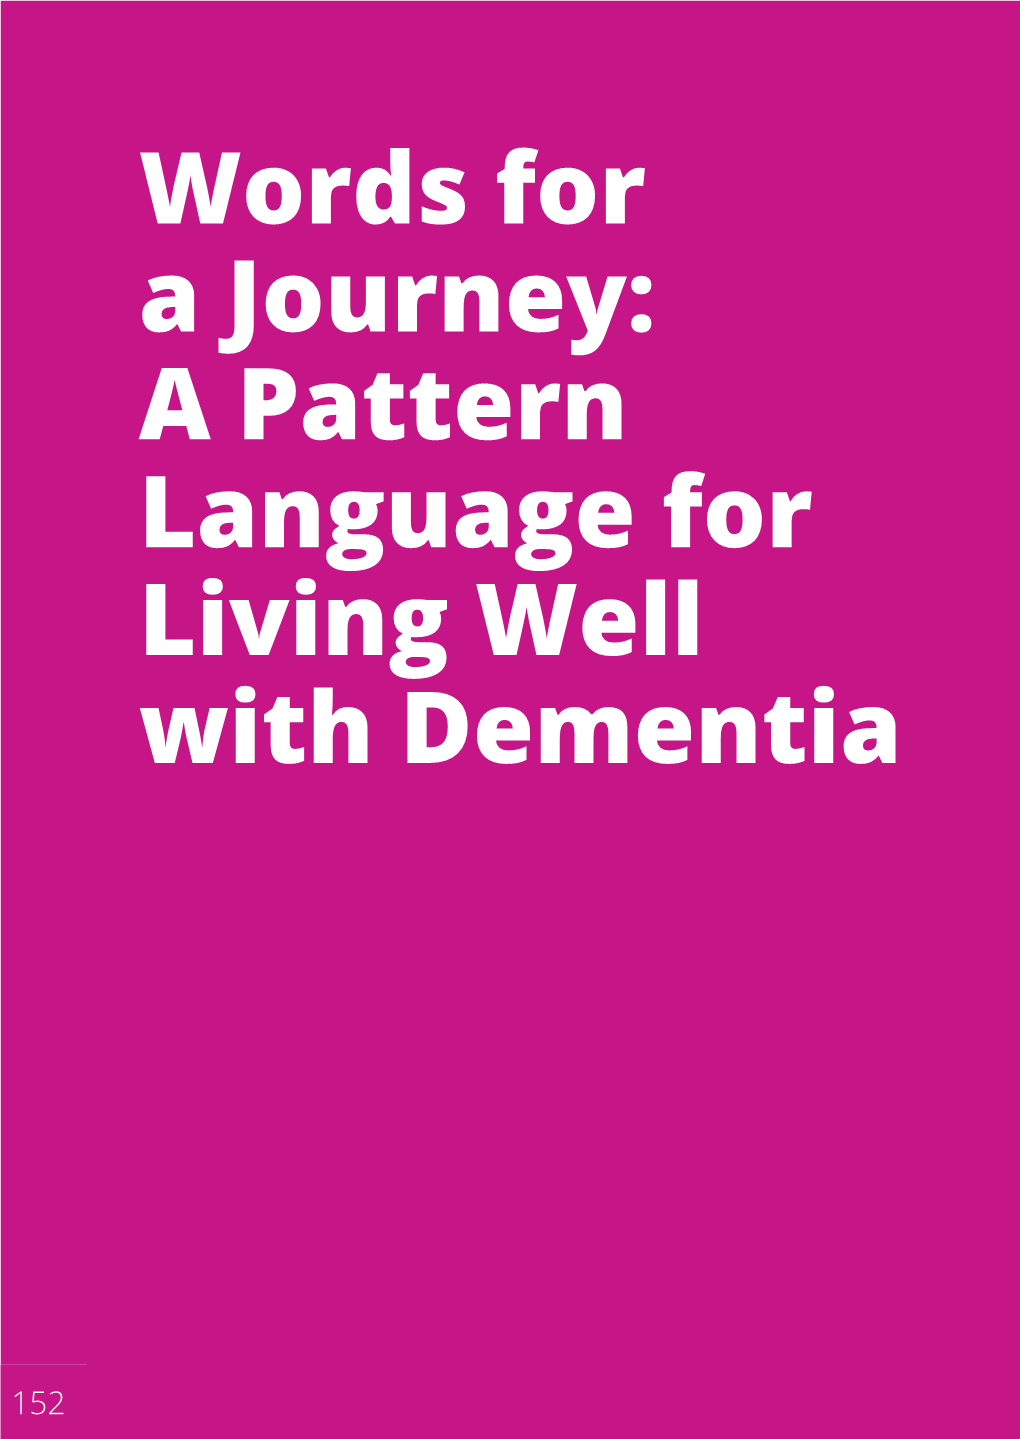 Words for a Journey: a Pattern Language for Living Well with Dementia